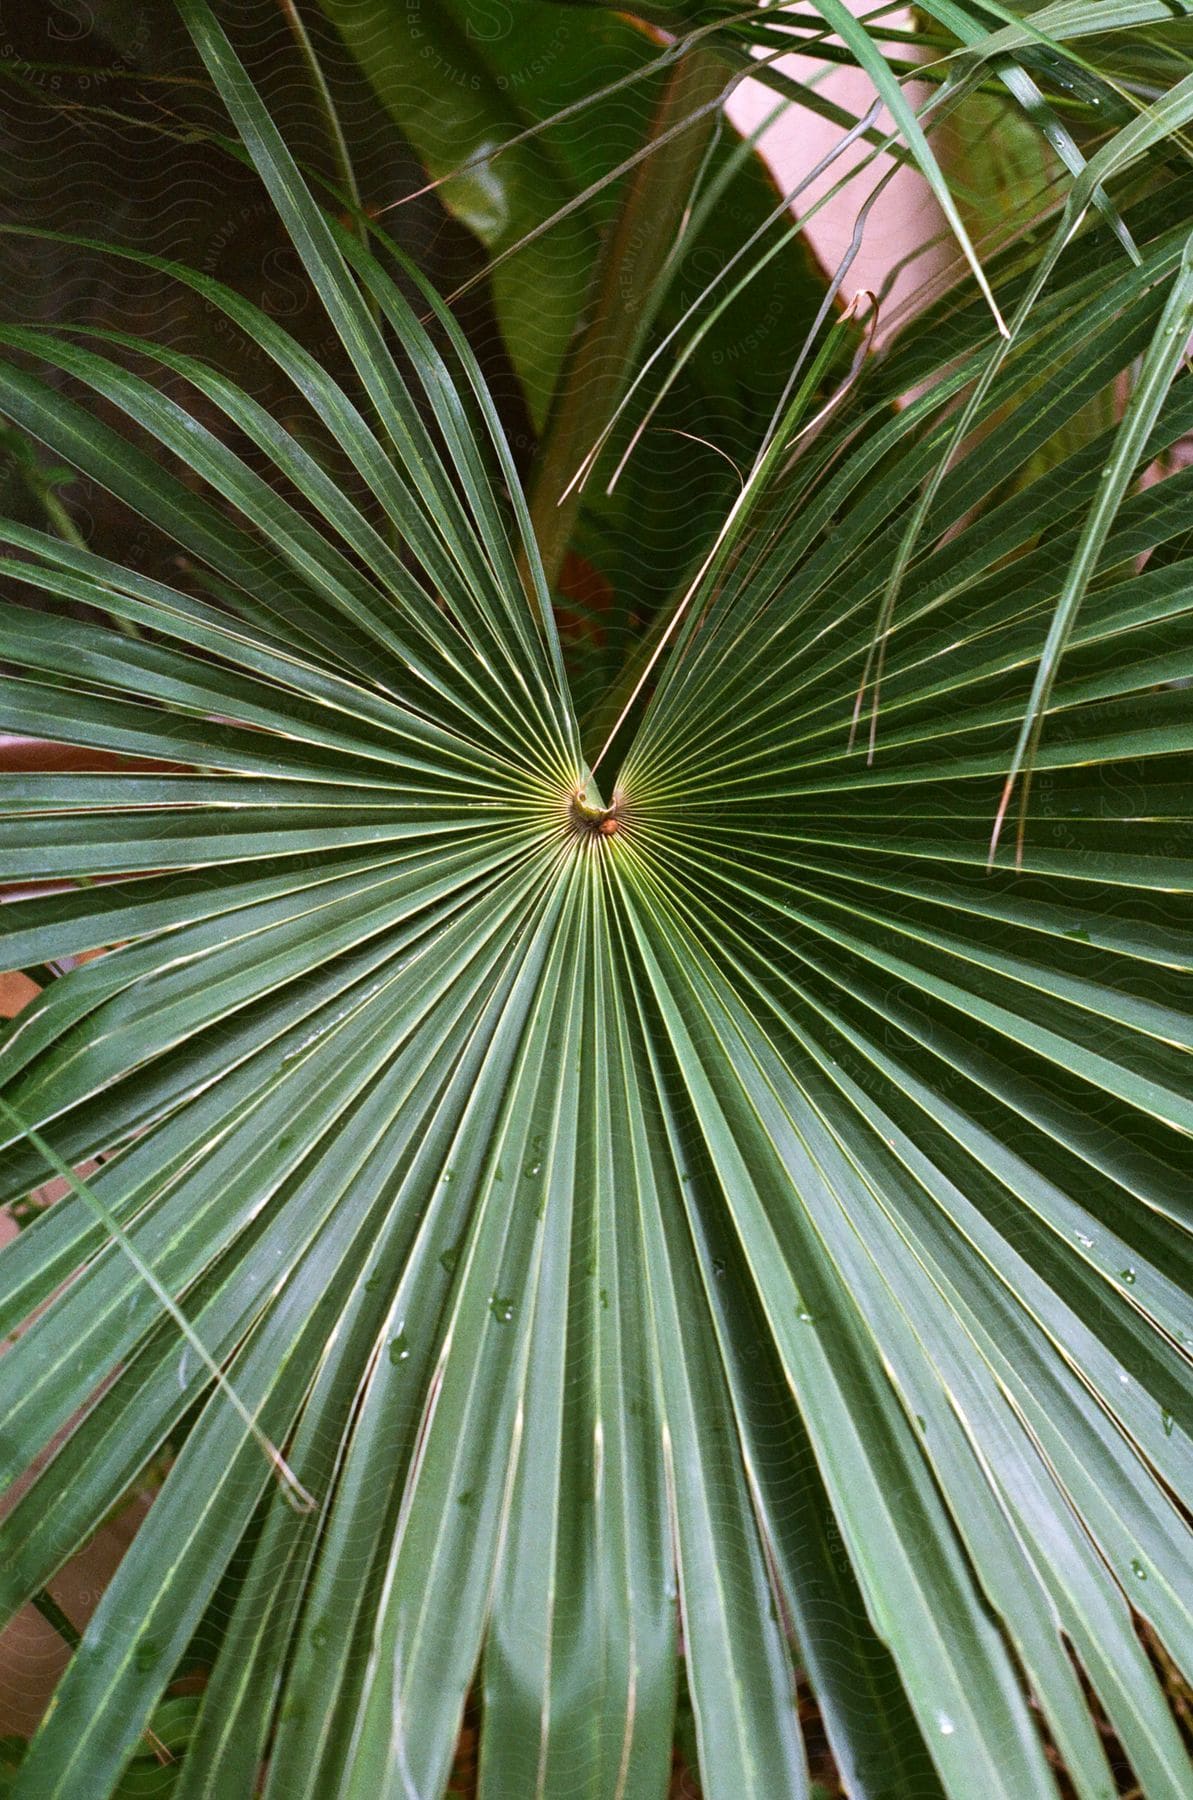 A large green palm leaf with many slender, radiant fronds.